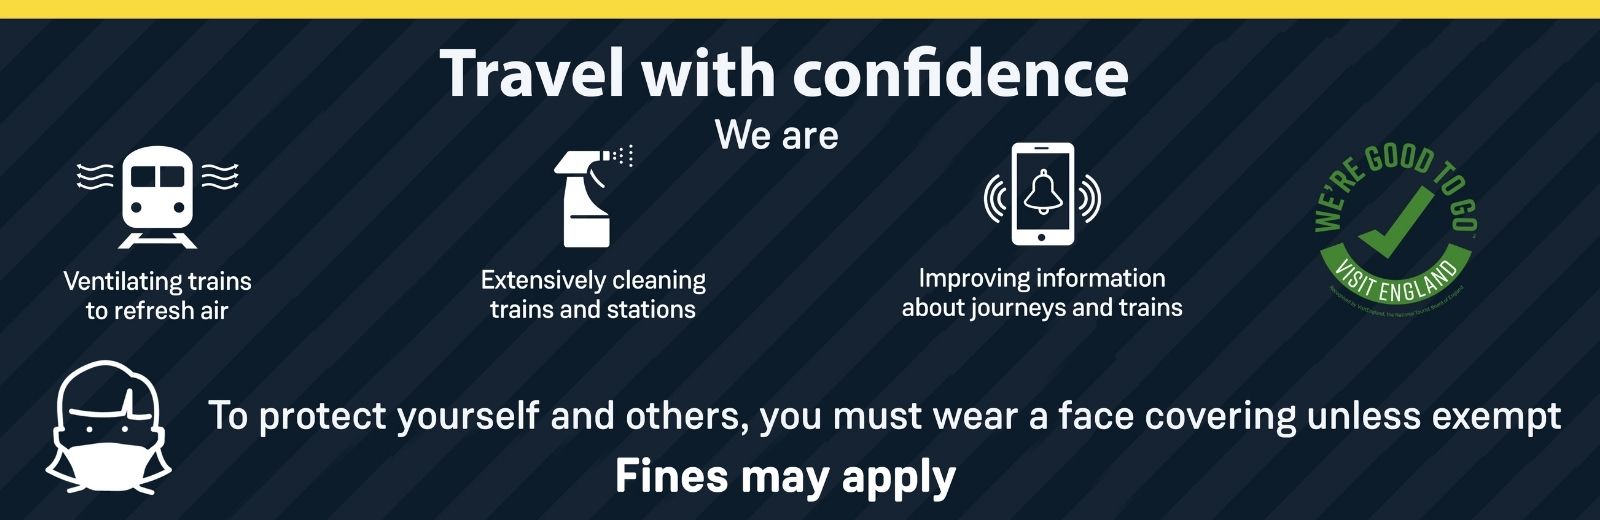 Travel with confidence - South Western Railway